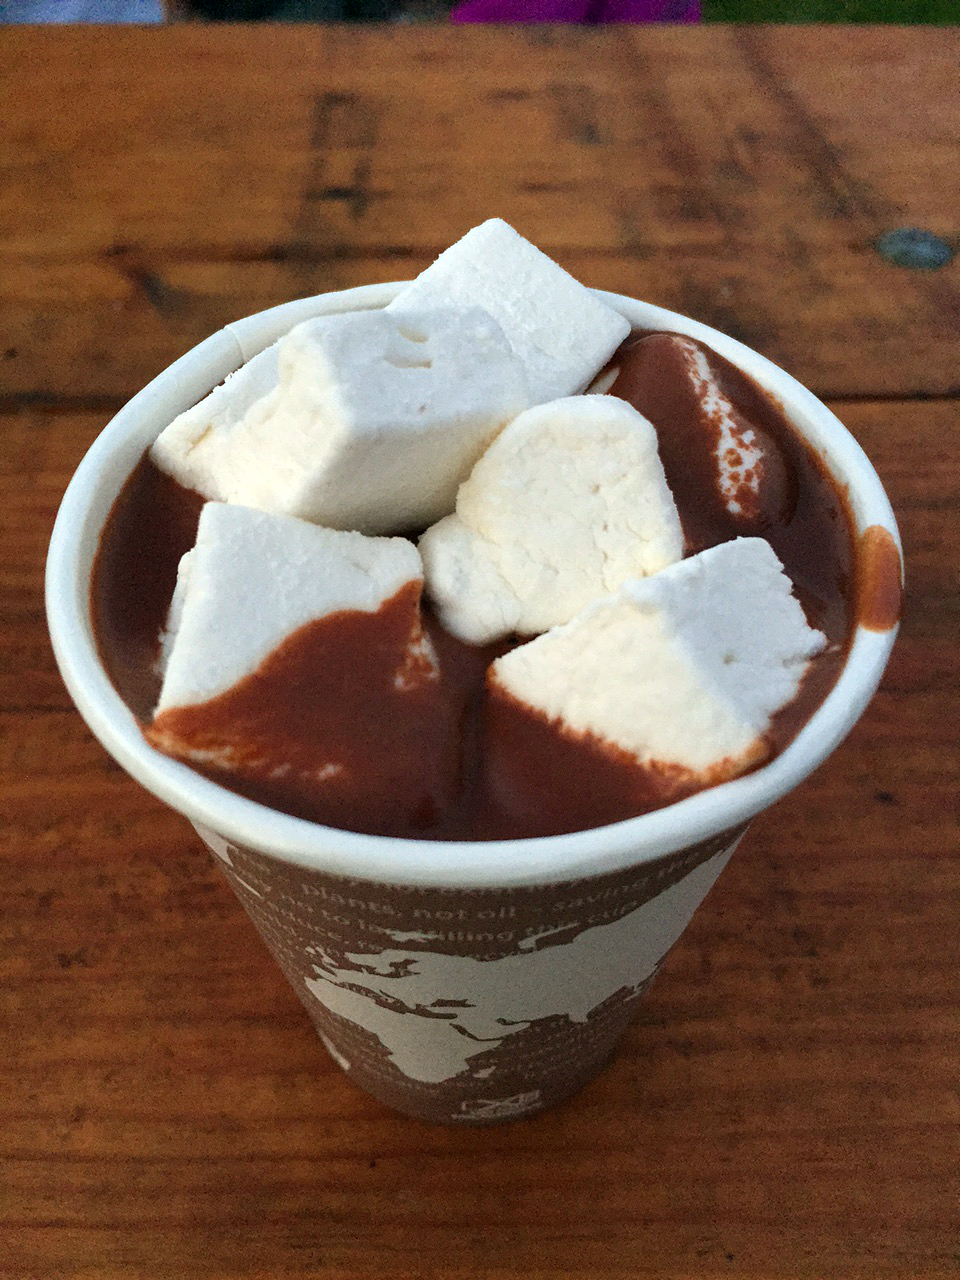 Hot Chocolate from Charles Chocolates with homemade marshmellows.